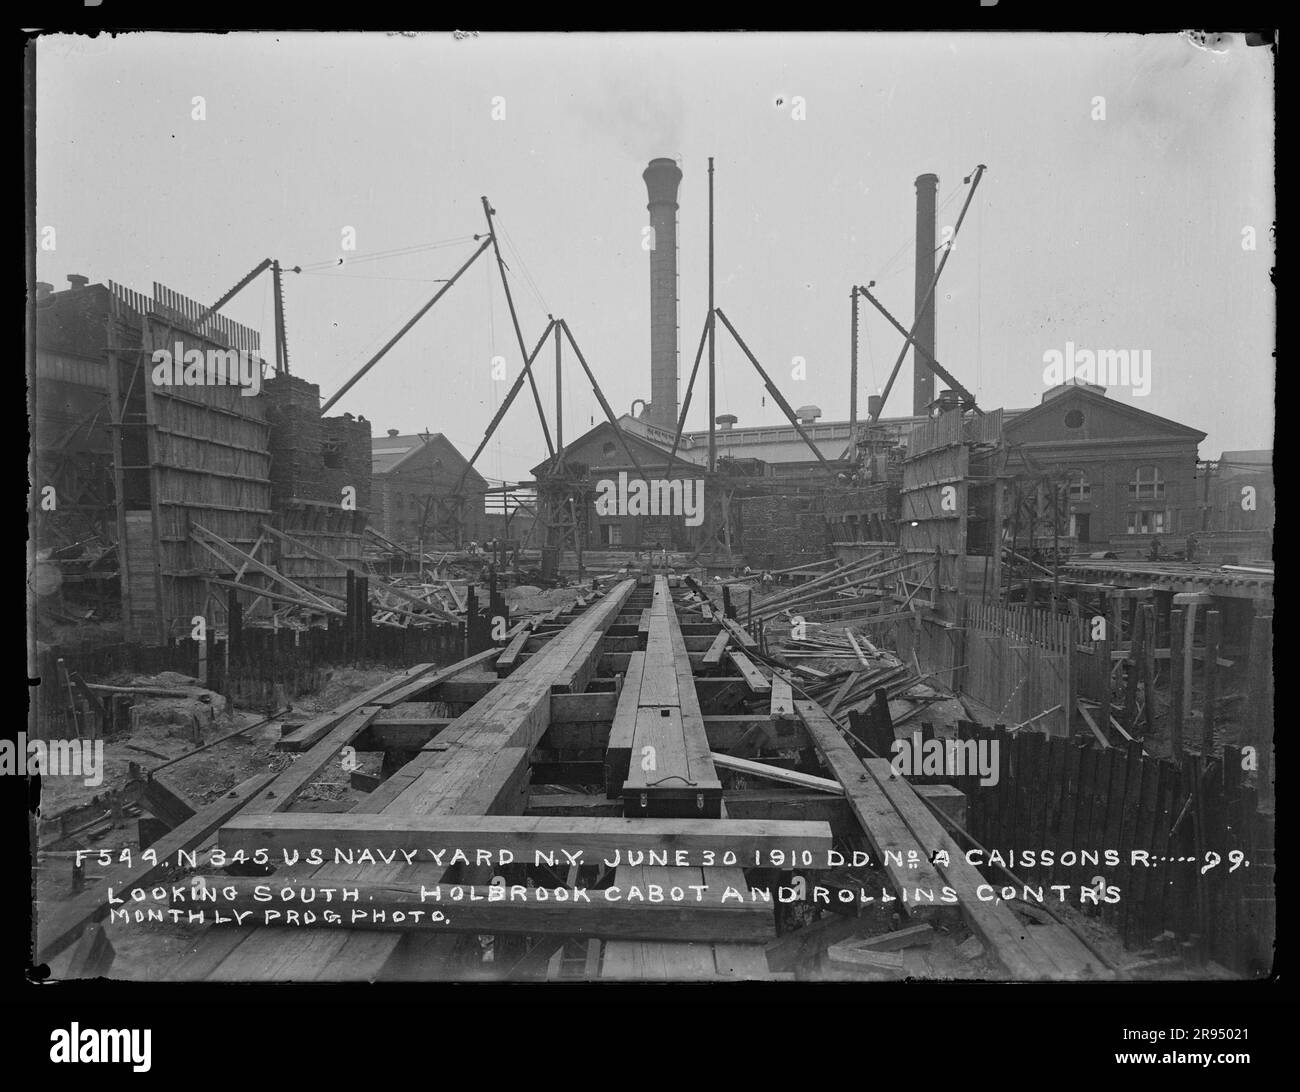 Dry Dock Number 4, Caissons R ..... 99, Looking South, Holbrook, Cabot and Rollins Contractors, Monthly Progress Photo. Glass Plate Negatives of the Construction and Repair of Buildings, Facilities, and Vessels at the New York Navy Yard. Stock Photo